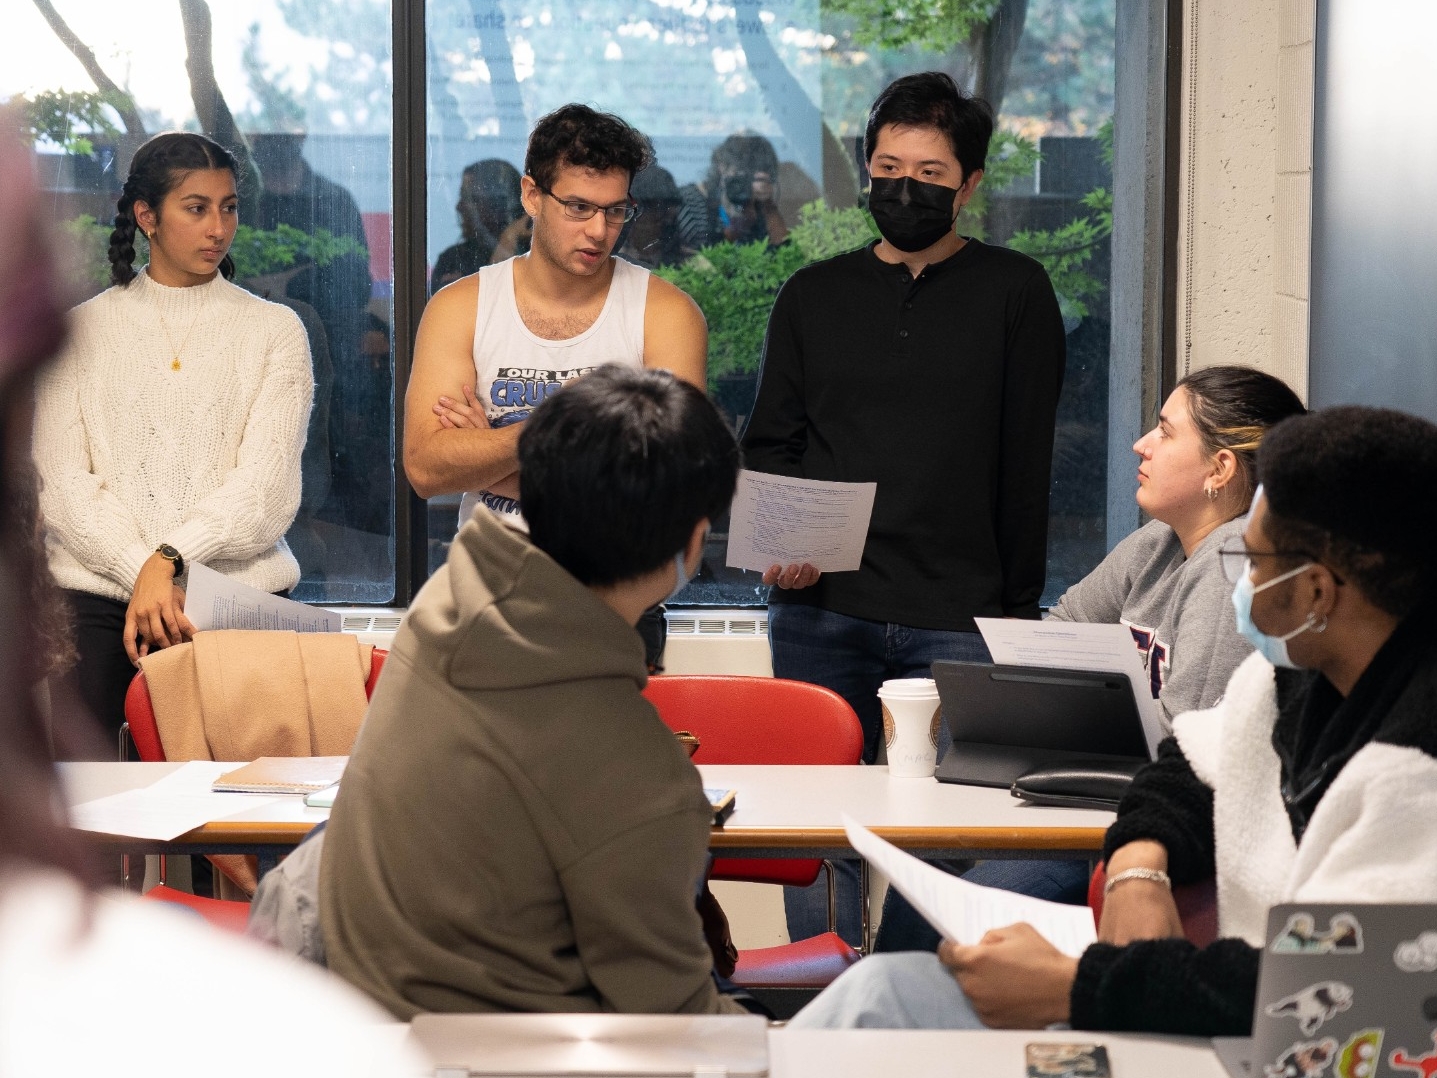 Students discussing a group presentation in class